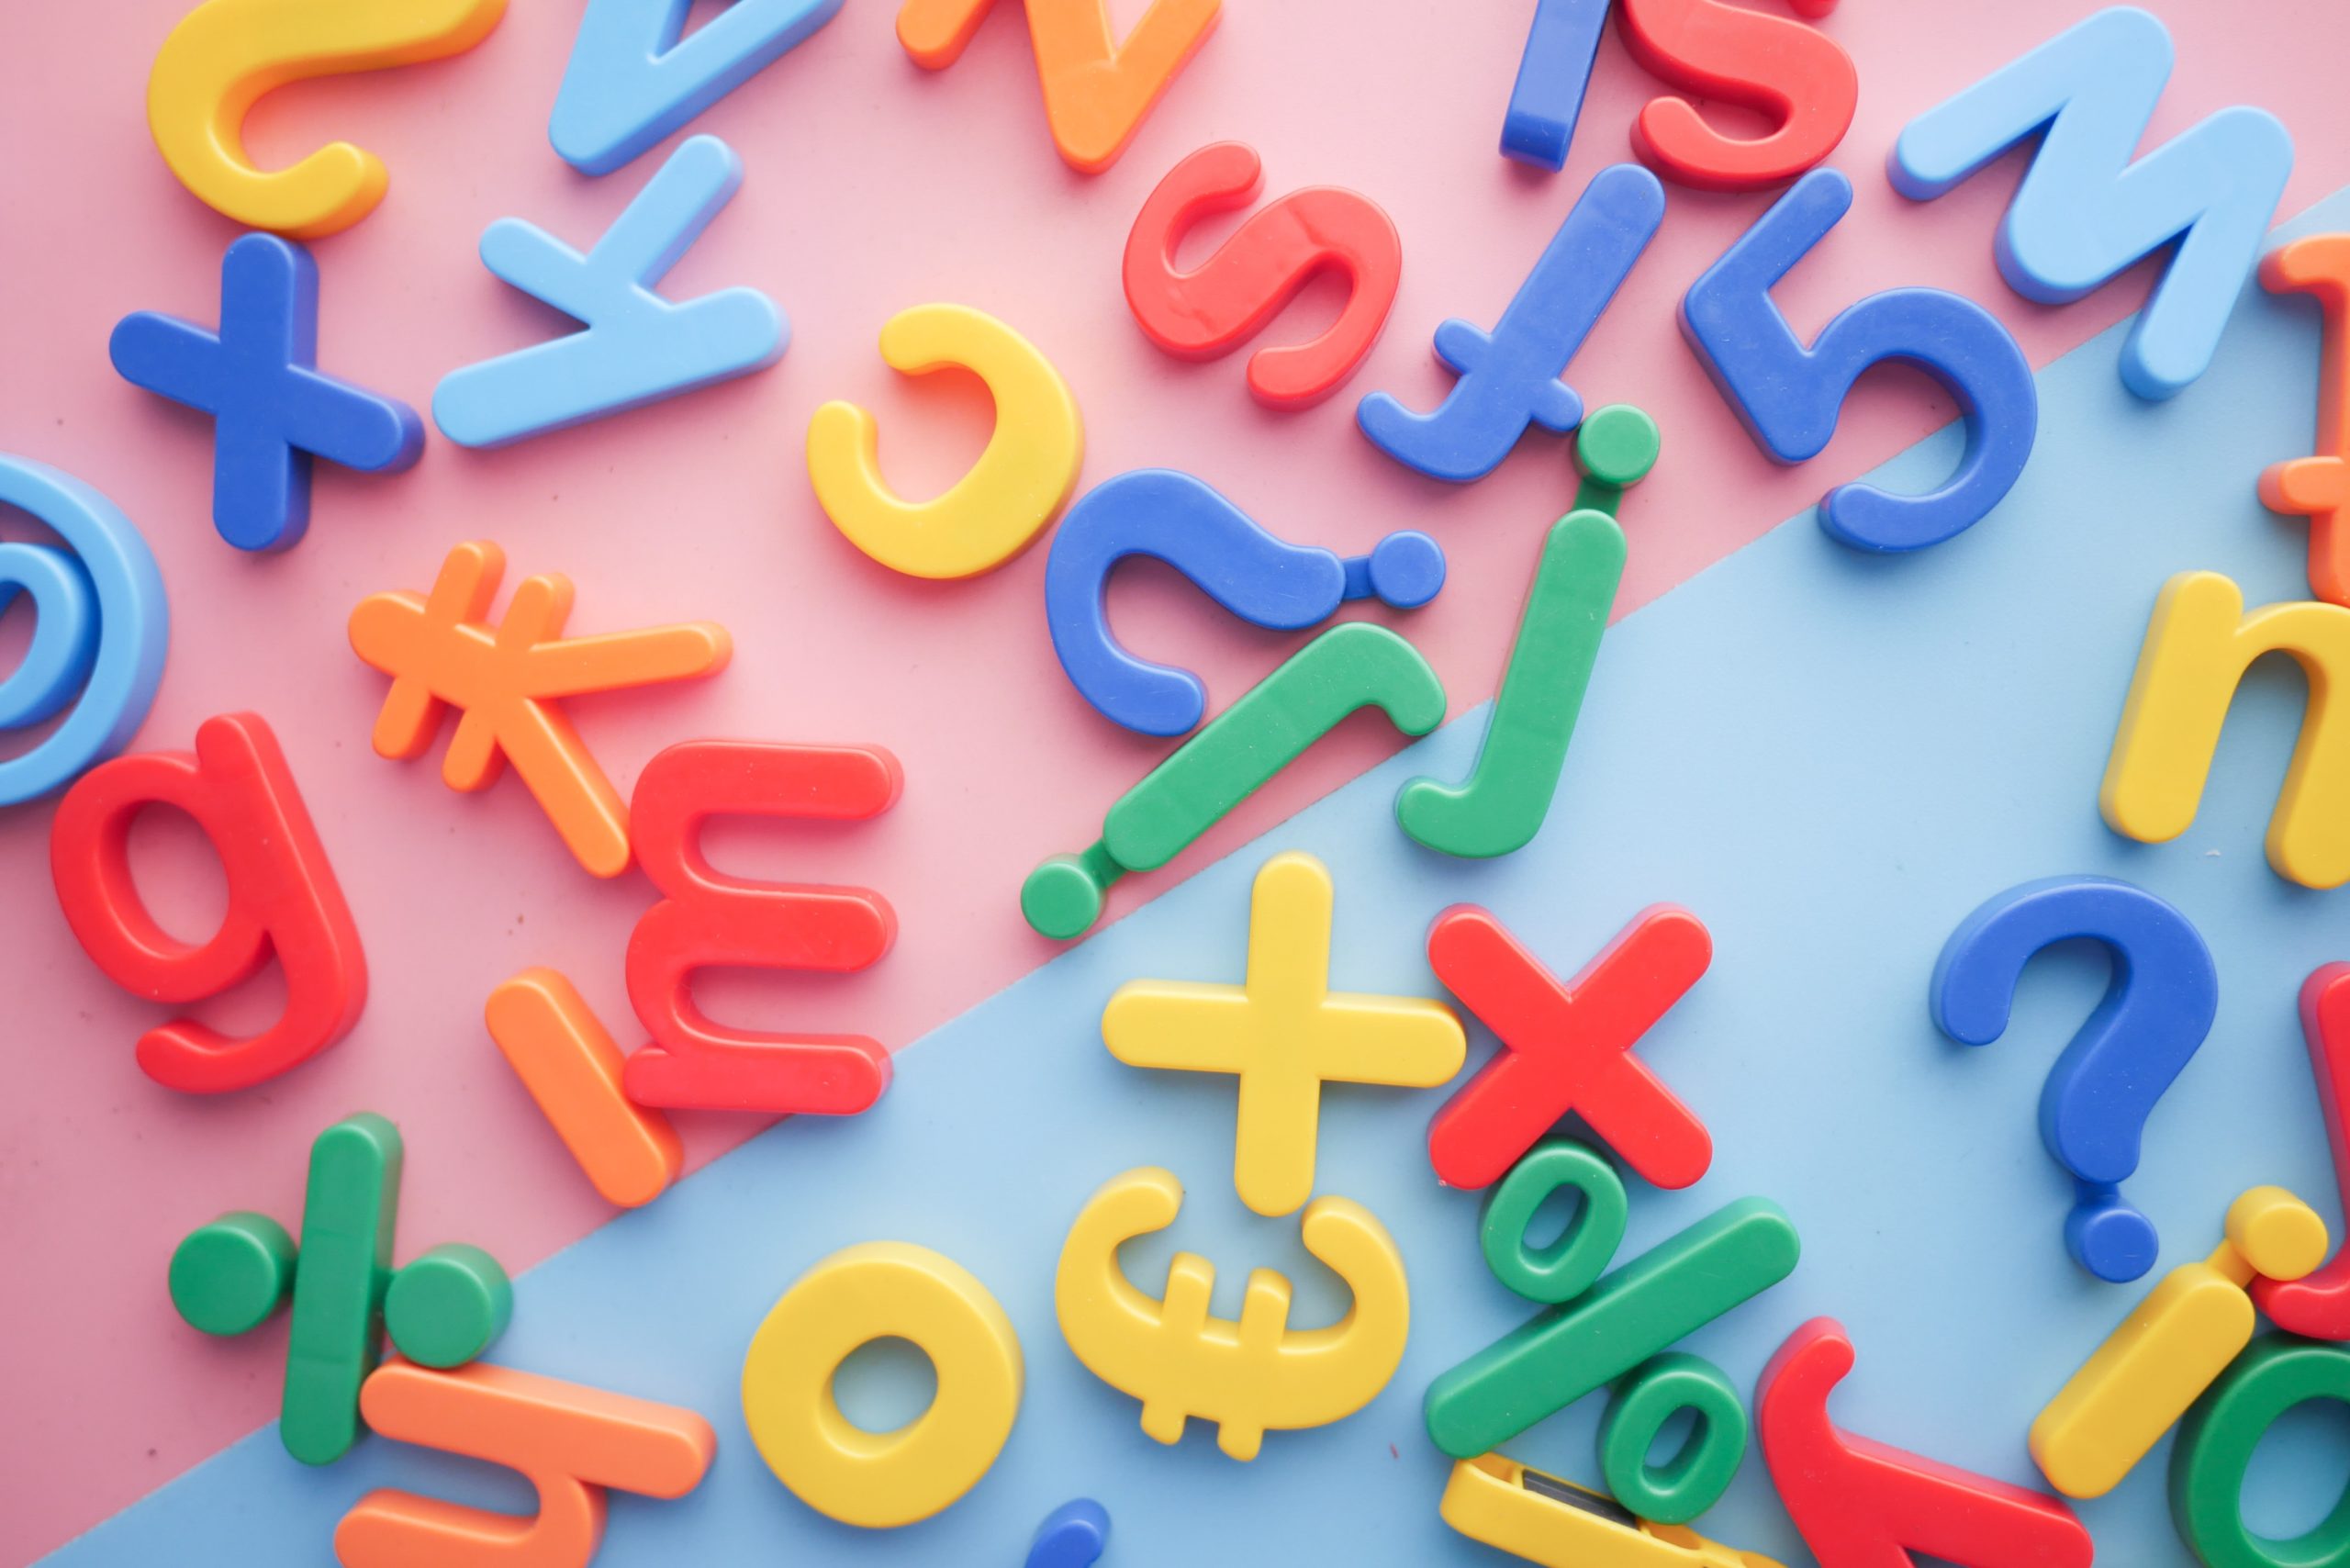 Several coloured magnetic letters, numbers and symbols lie on some pink and blue paper.